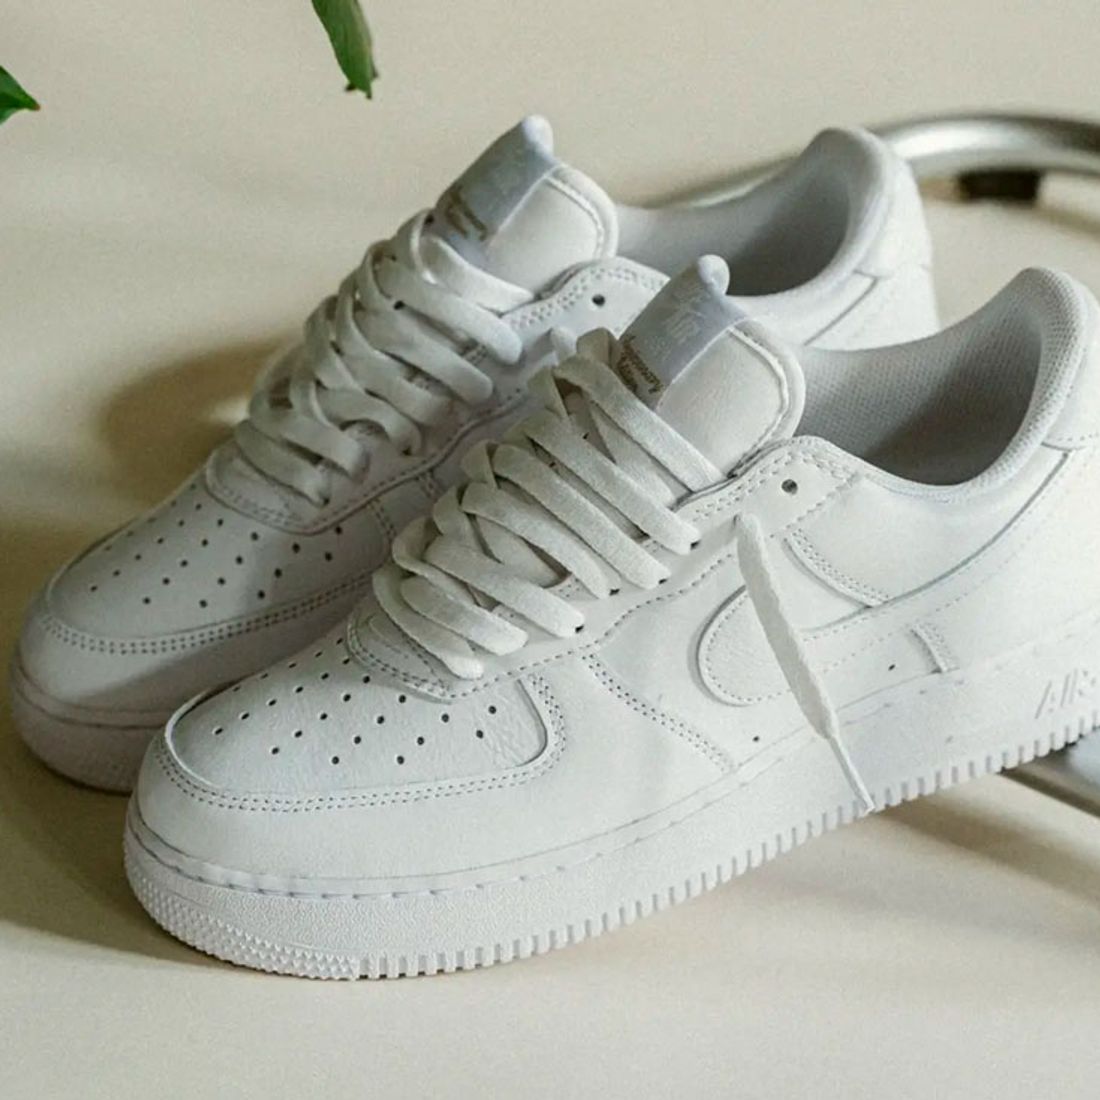 Nike Kick Off the Air Force 1 'Colour of the Month' Series with White -  Sneaker Freaker